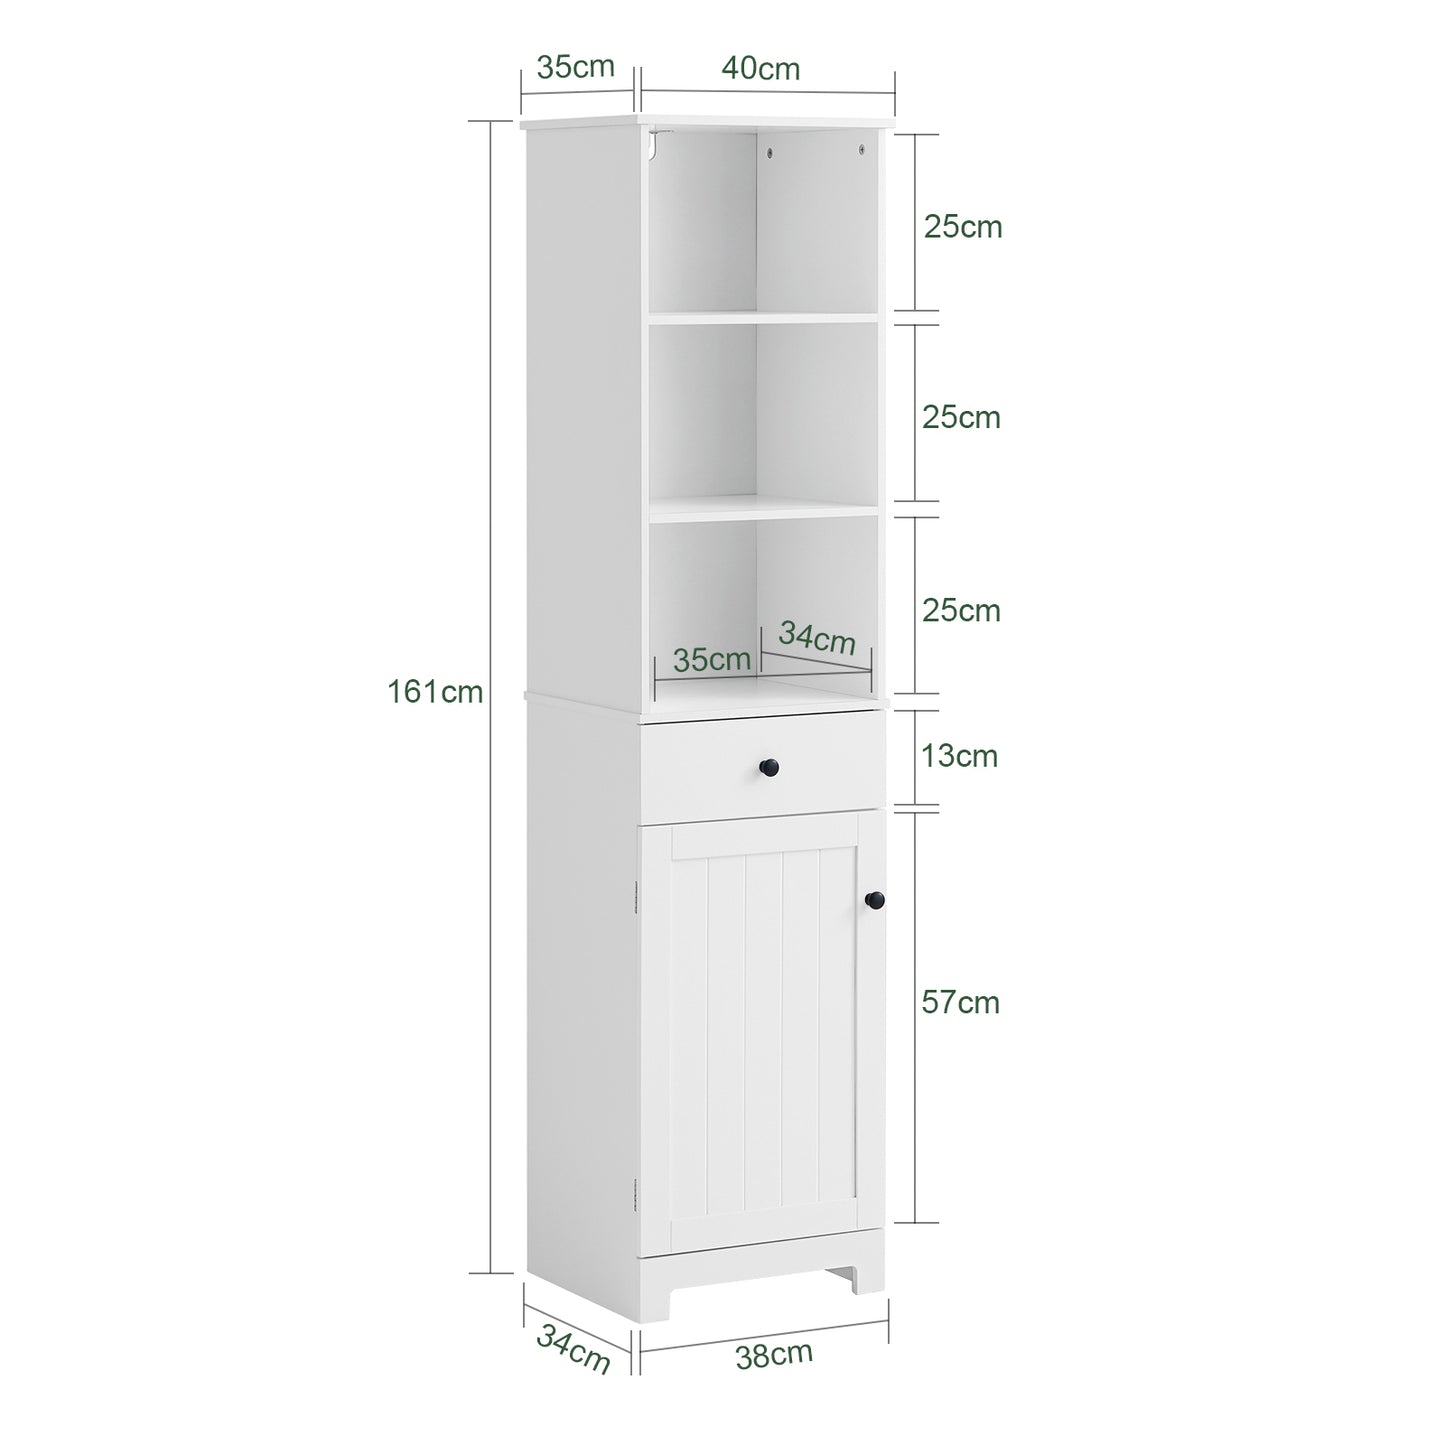 SoBuy White Tall Bathroom Storage Cabinet Unit with 3 Shelves 1 Drawer 1 Cabinet